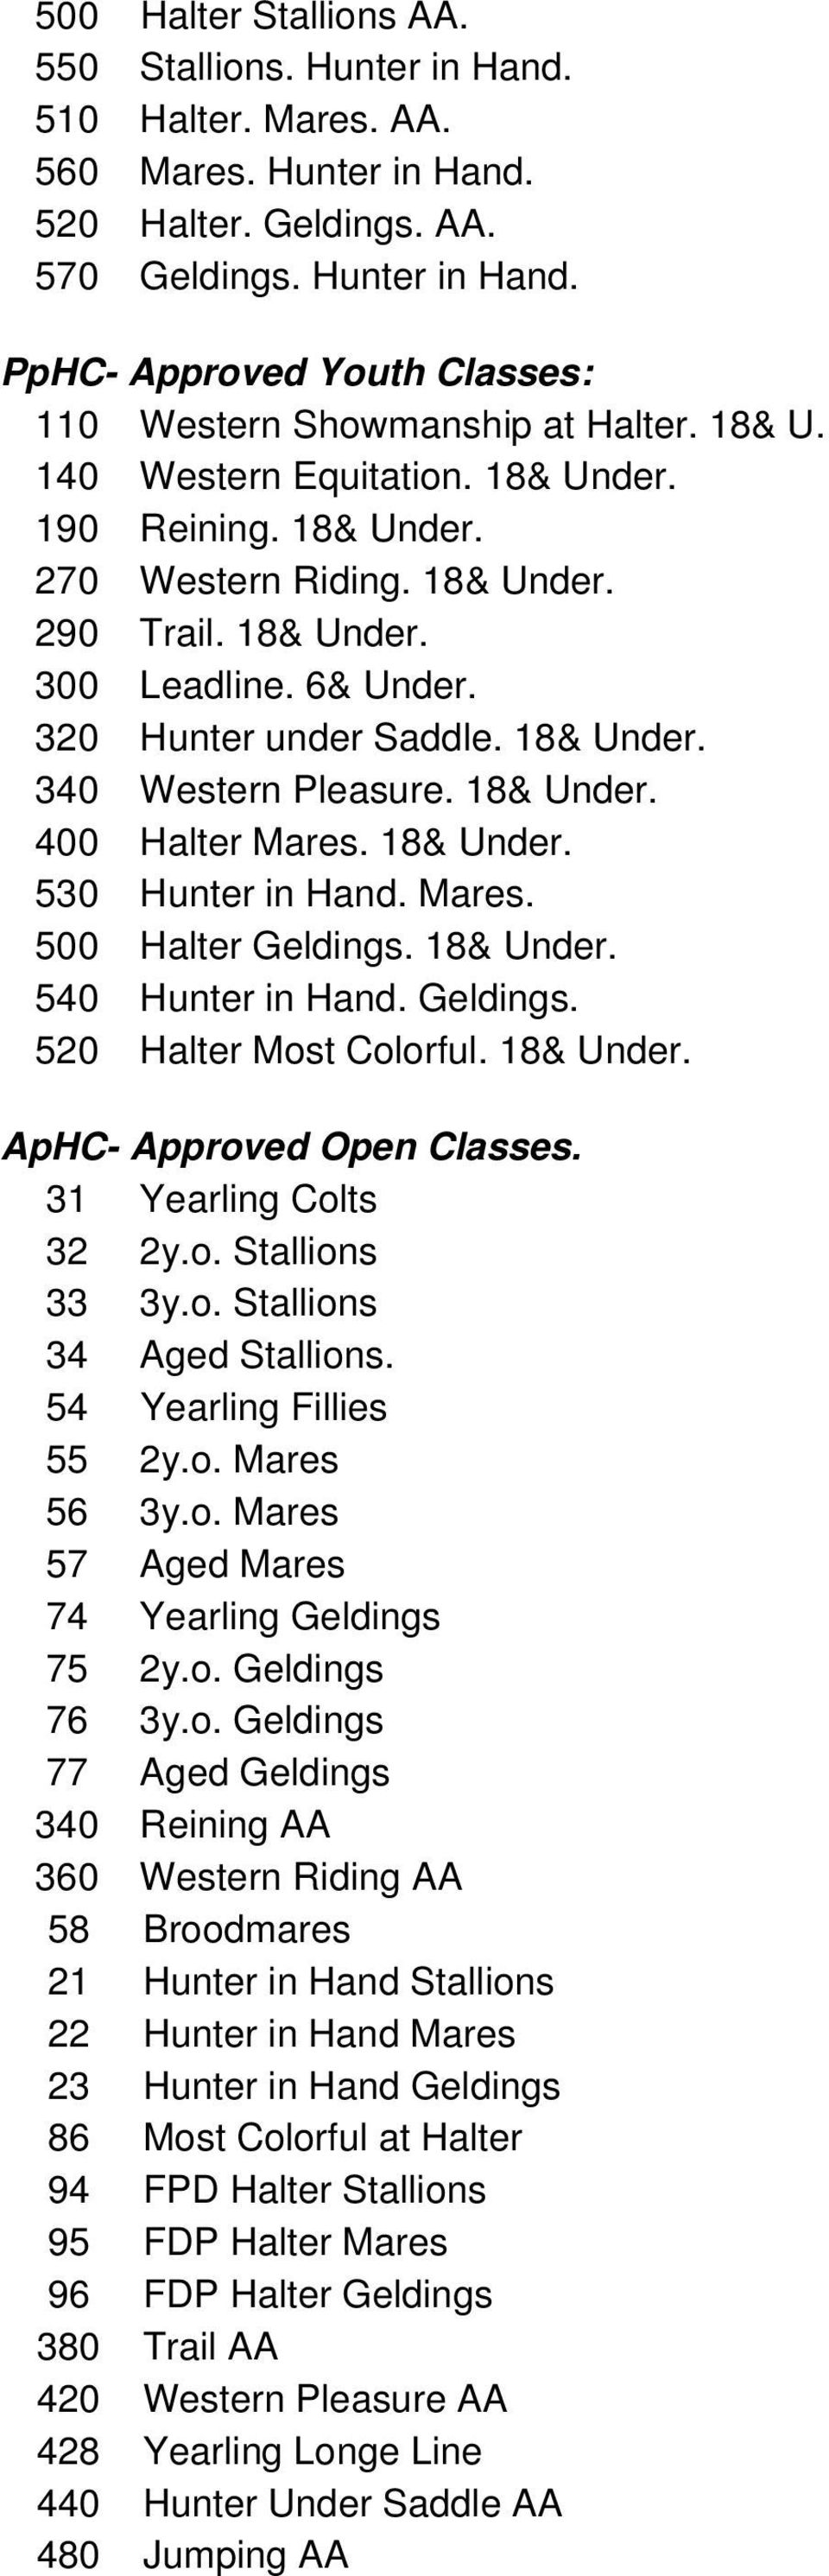 18& Under. 400 Halter Mares. 18& Under. 530 Hunter in Hand. Mares. 500 Halter Geldings. 18& Under. 540 Hunter in Hand. Geldings. 520 Halter Most Colorful. 18& Under. ApHC- Approved Open Classes.